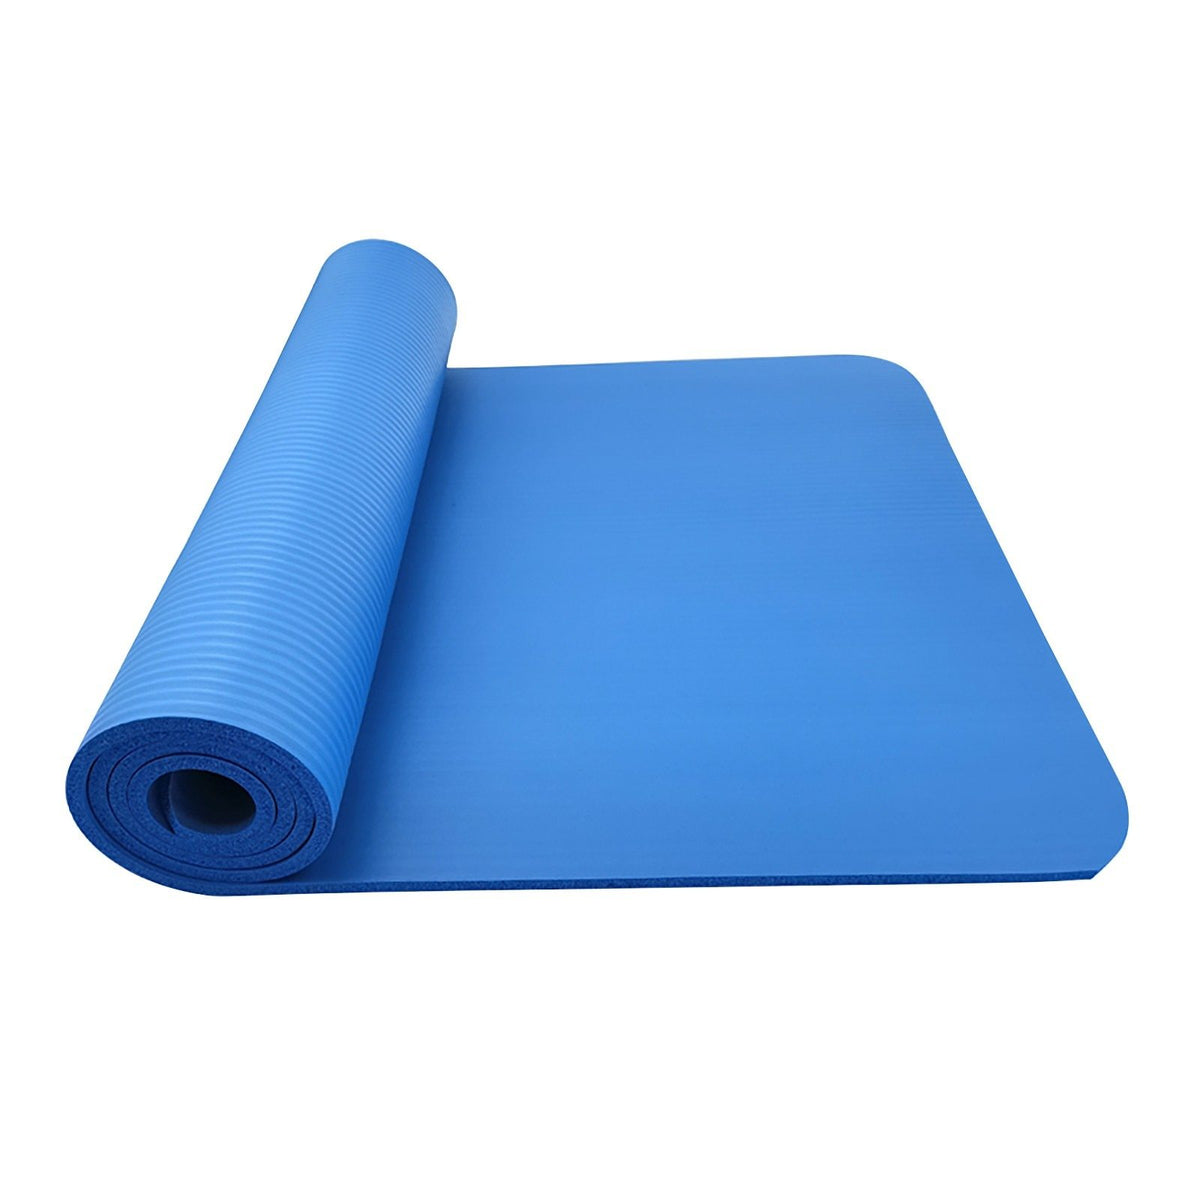  Gofit Sapphire Blue Double-Thick Yoga Mat, 68-Inch (GF-2XYOGA)  (GOFGF2XYOGA) : Sports & Outdoors